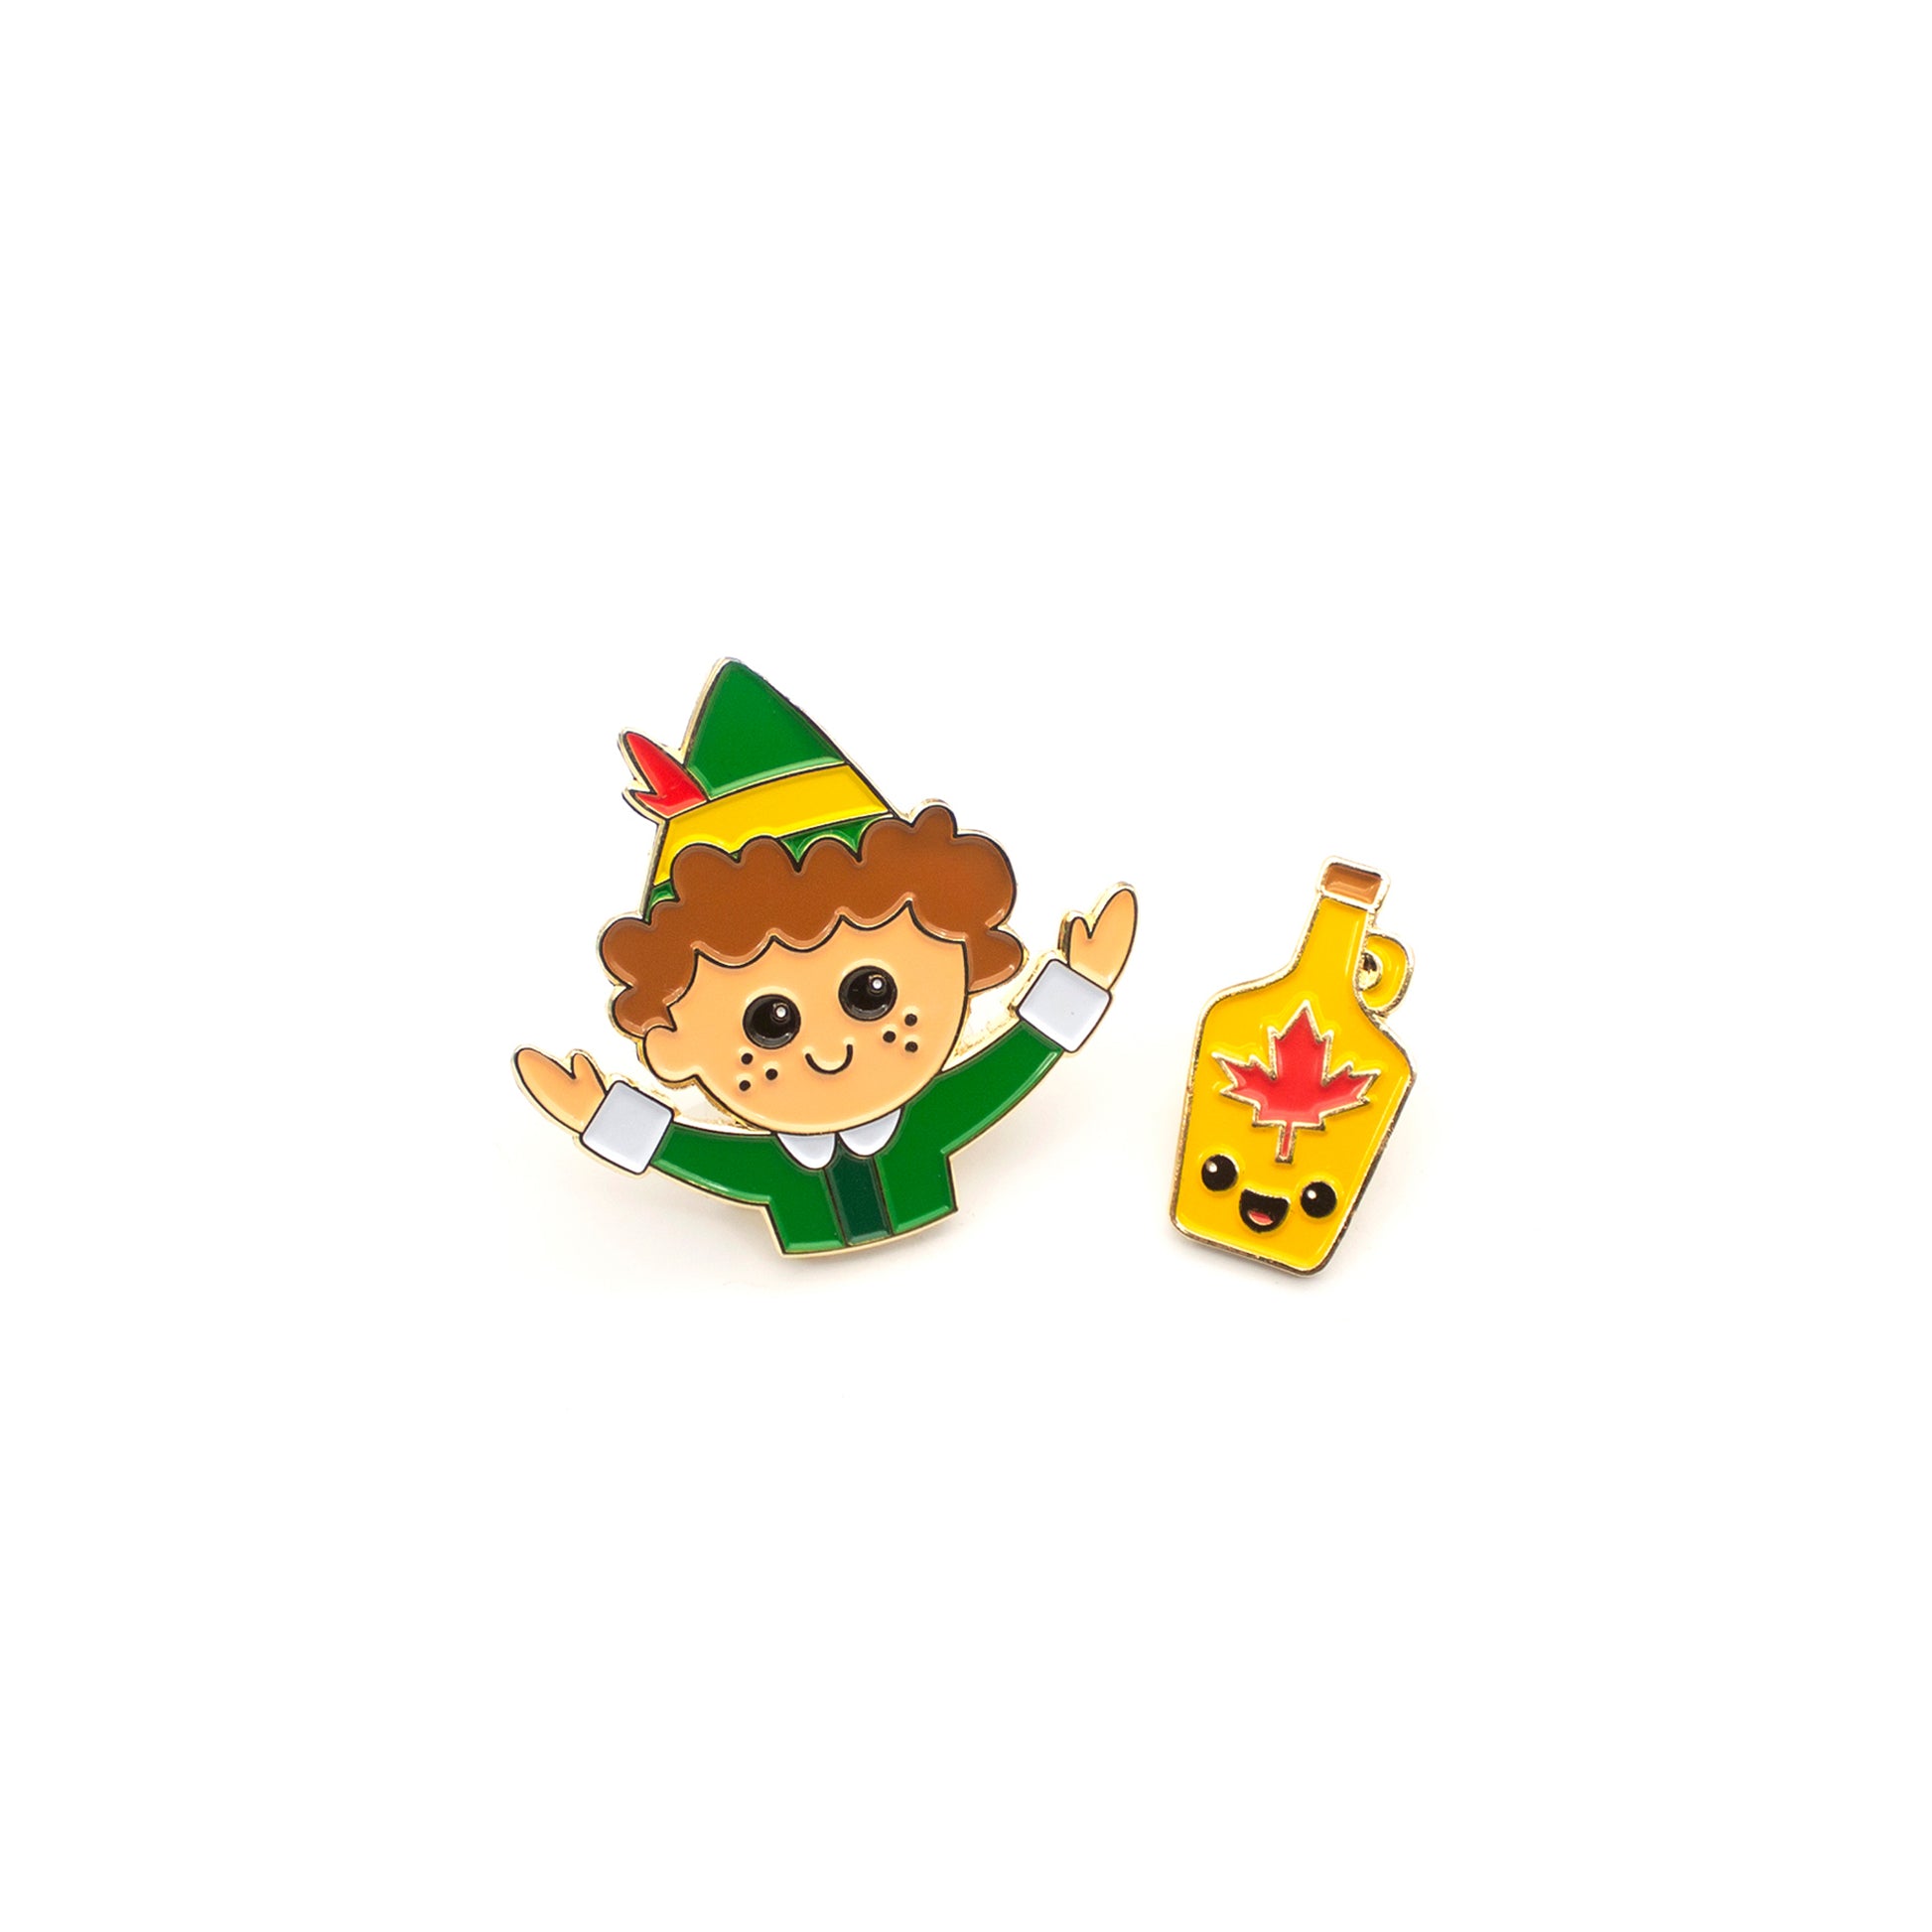 Buddy the Elf and Maple Syrup enamel pin set on white background